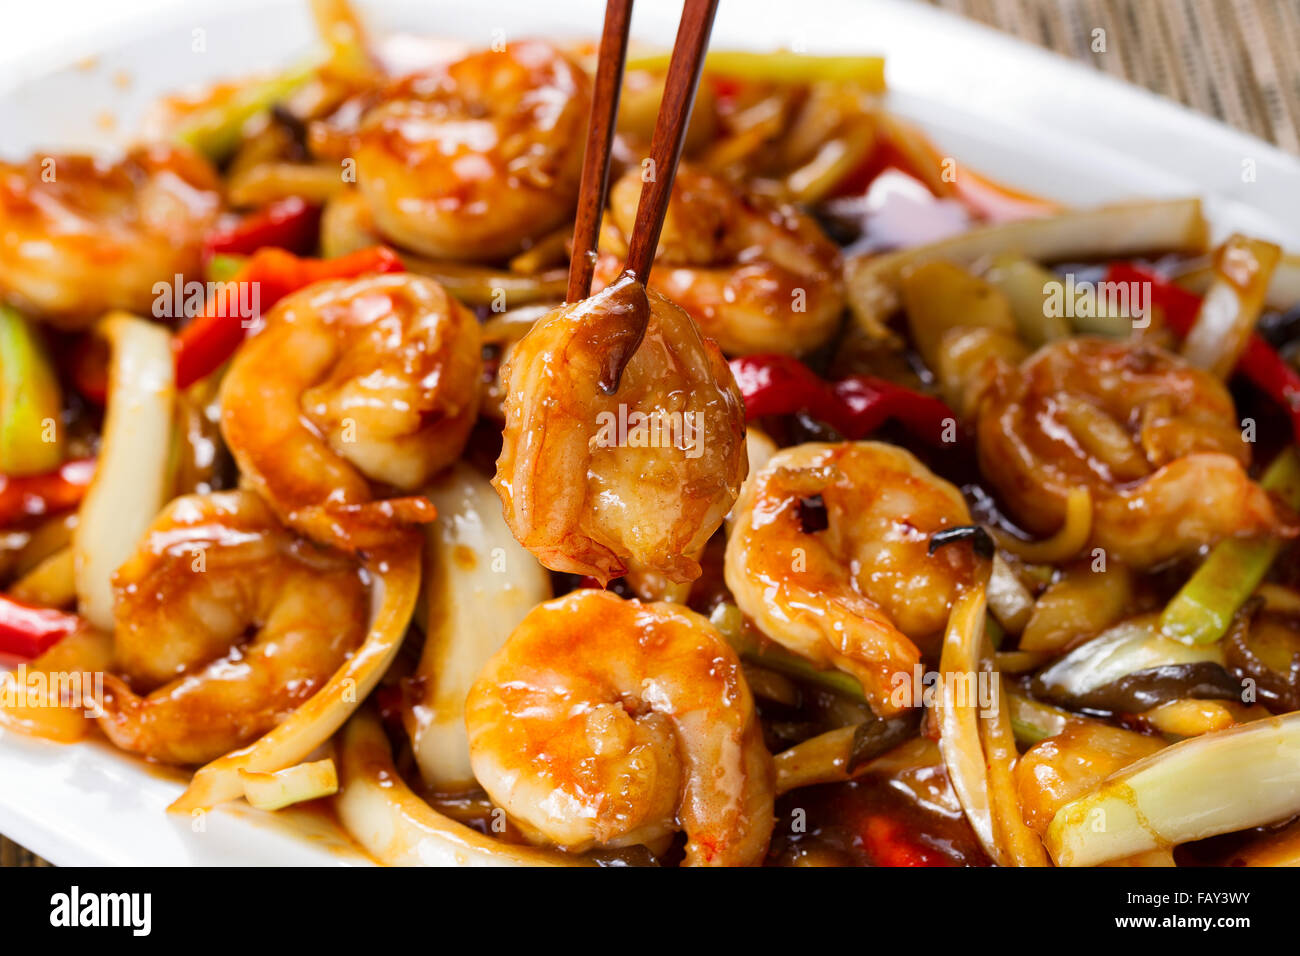 Close up front view of a curry shrimp, selective focus on single piece in chopsticks, with fresh peppers on onion in background. Stock Photo